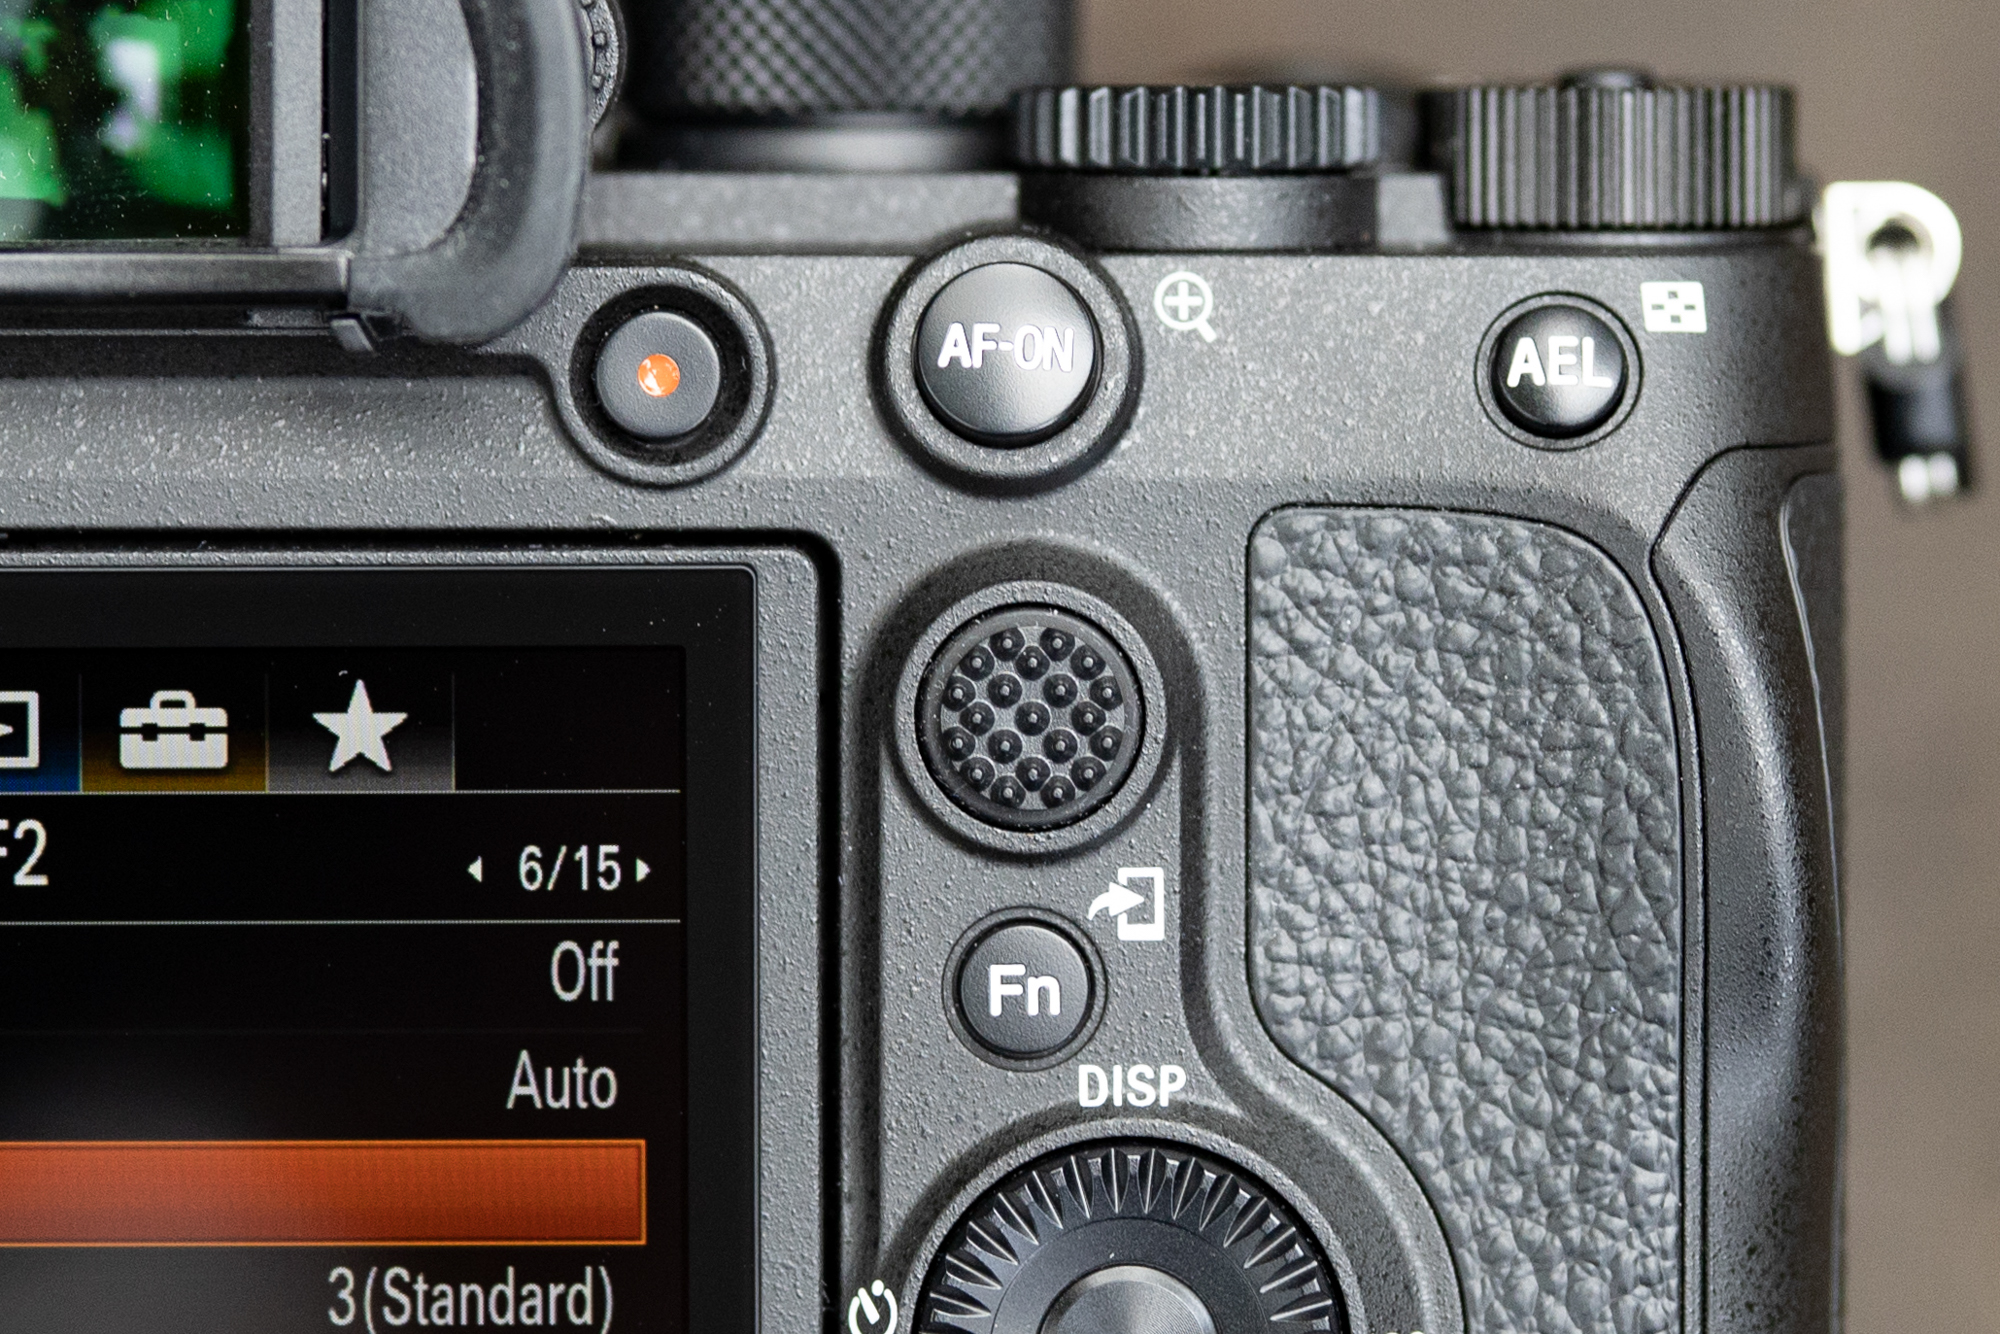 The rear controls of the Sony A7R IV